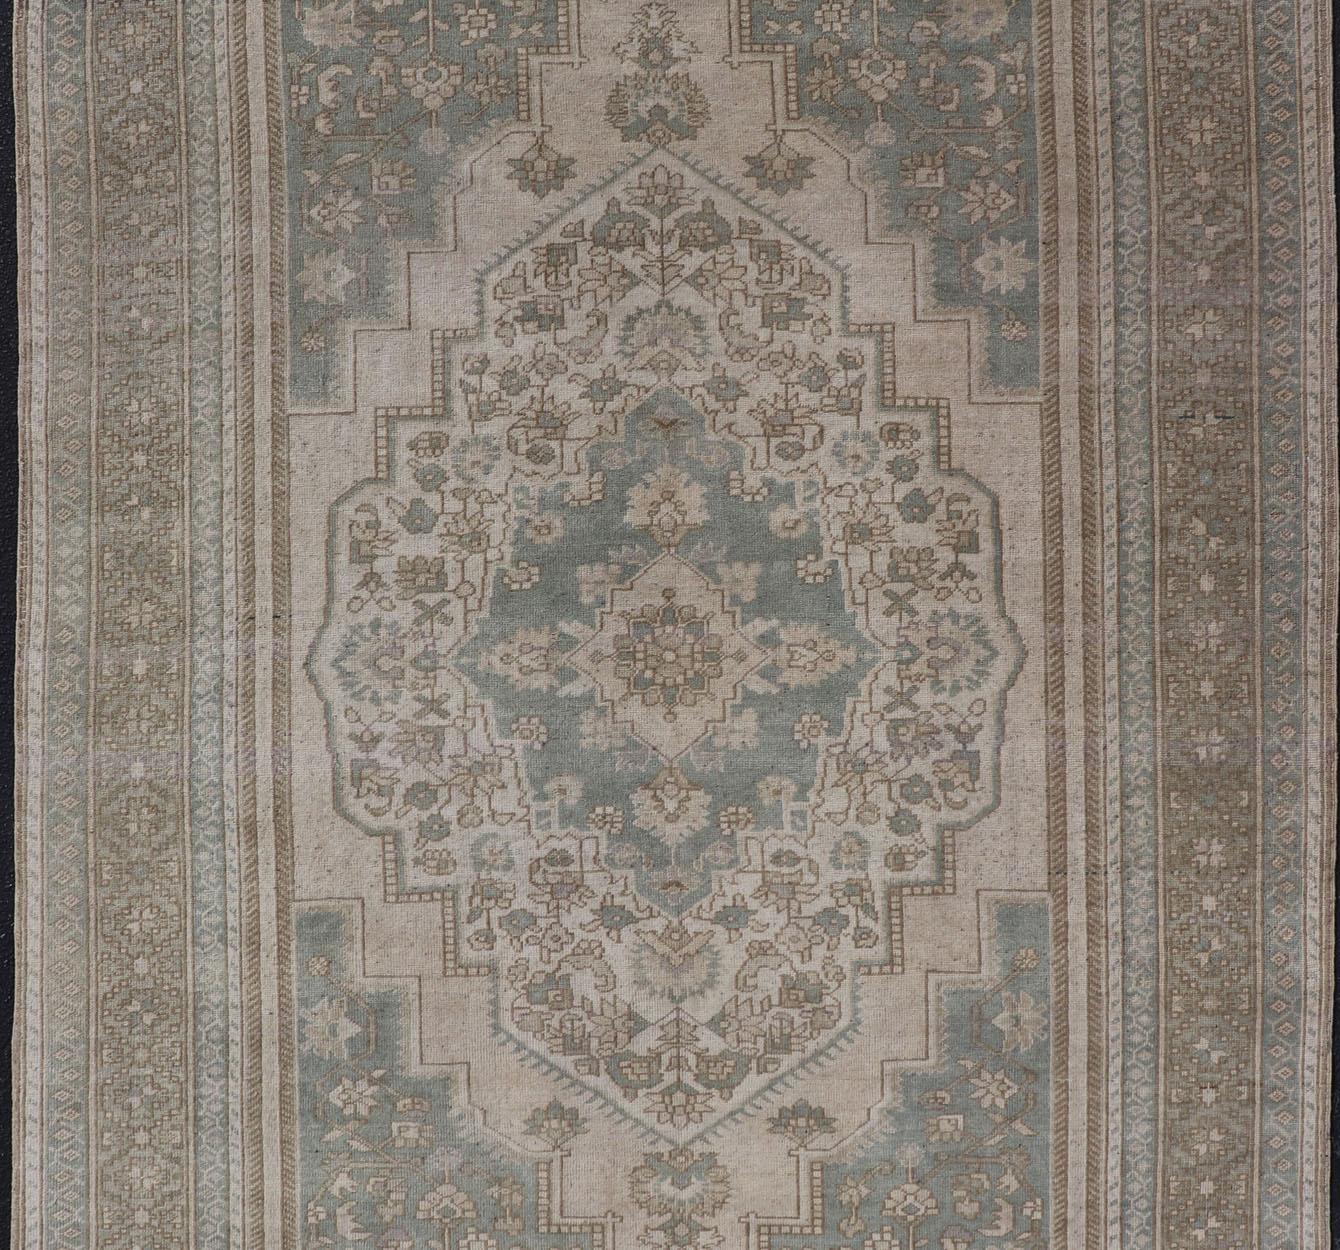 Turkish Oushak Vintage Medallion Rug in Light Blue-Green, Tan, Taupe, and Cream For Sale 3